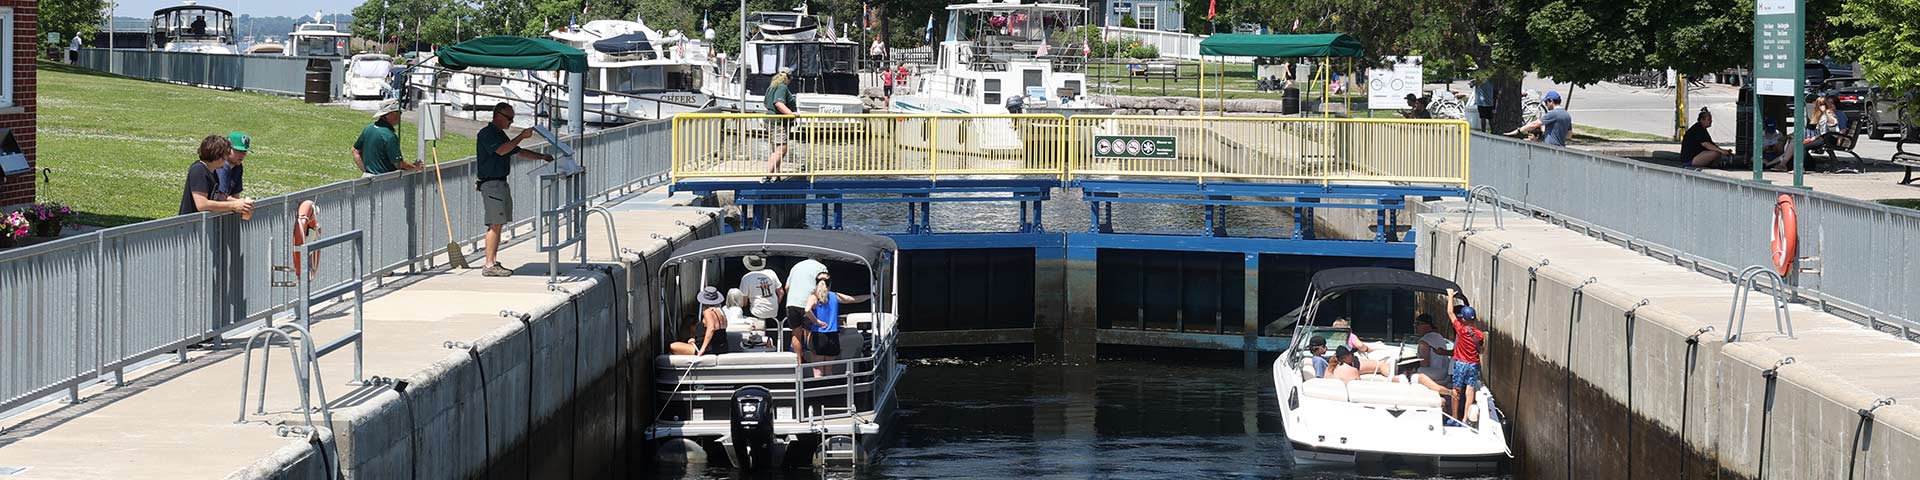 Busy day of boating at Lock 32 - Bobcaygeon.